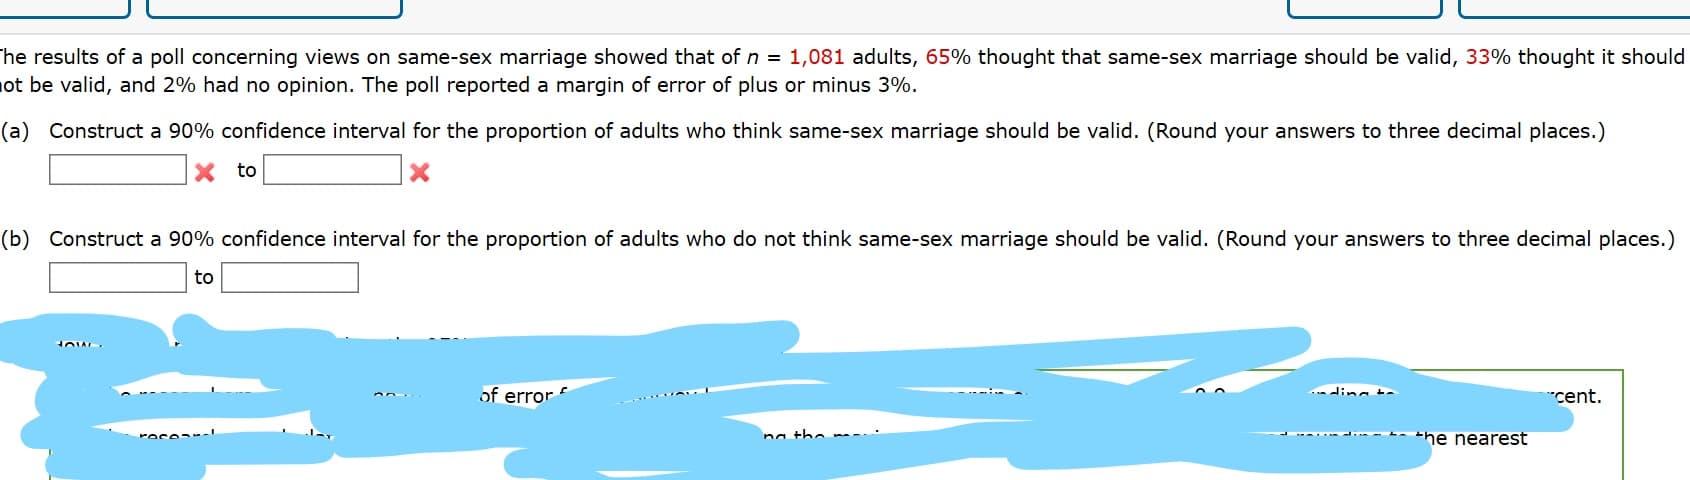 he results of a poll concerning views on same-sex marriage showed that of n = 1,081 adults, 65% thought that same-sex marriage should be valid, 33% thought it should
ot be valid, and 2% had no opinion. The poll reported a margin of error of plus or minus 3%.
(a) Construct a 90% confidence interval for the proportion of adults who think same-sex marriage should be valid. (Round your answers to three decimal places.)
to
(b) Construct a 90% confidence interval for the proportion of adults who do not think same-sex marriage should be valid. (Round your answers to three decimal places.)
to
of error
ding t
cent.
- -- the nearest
na the
